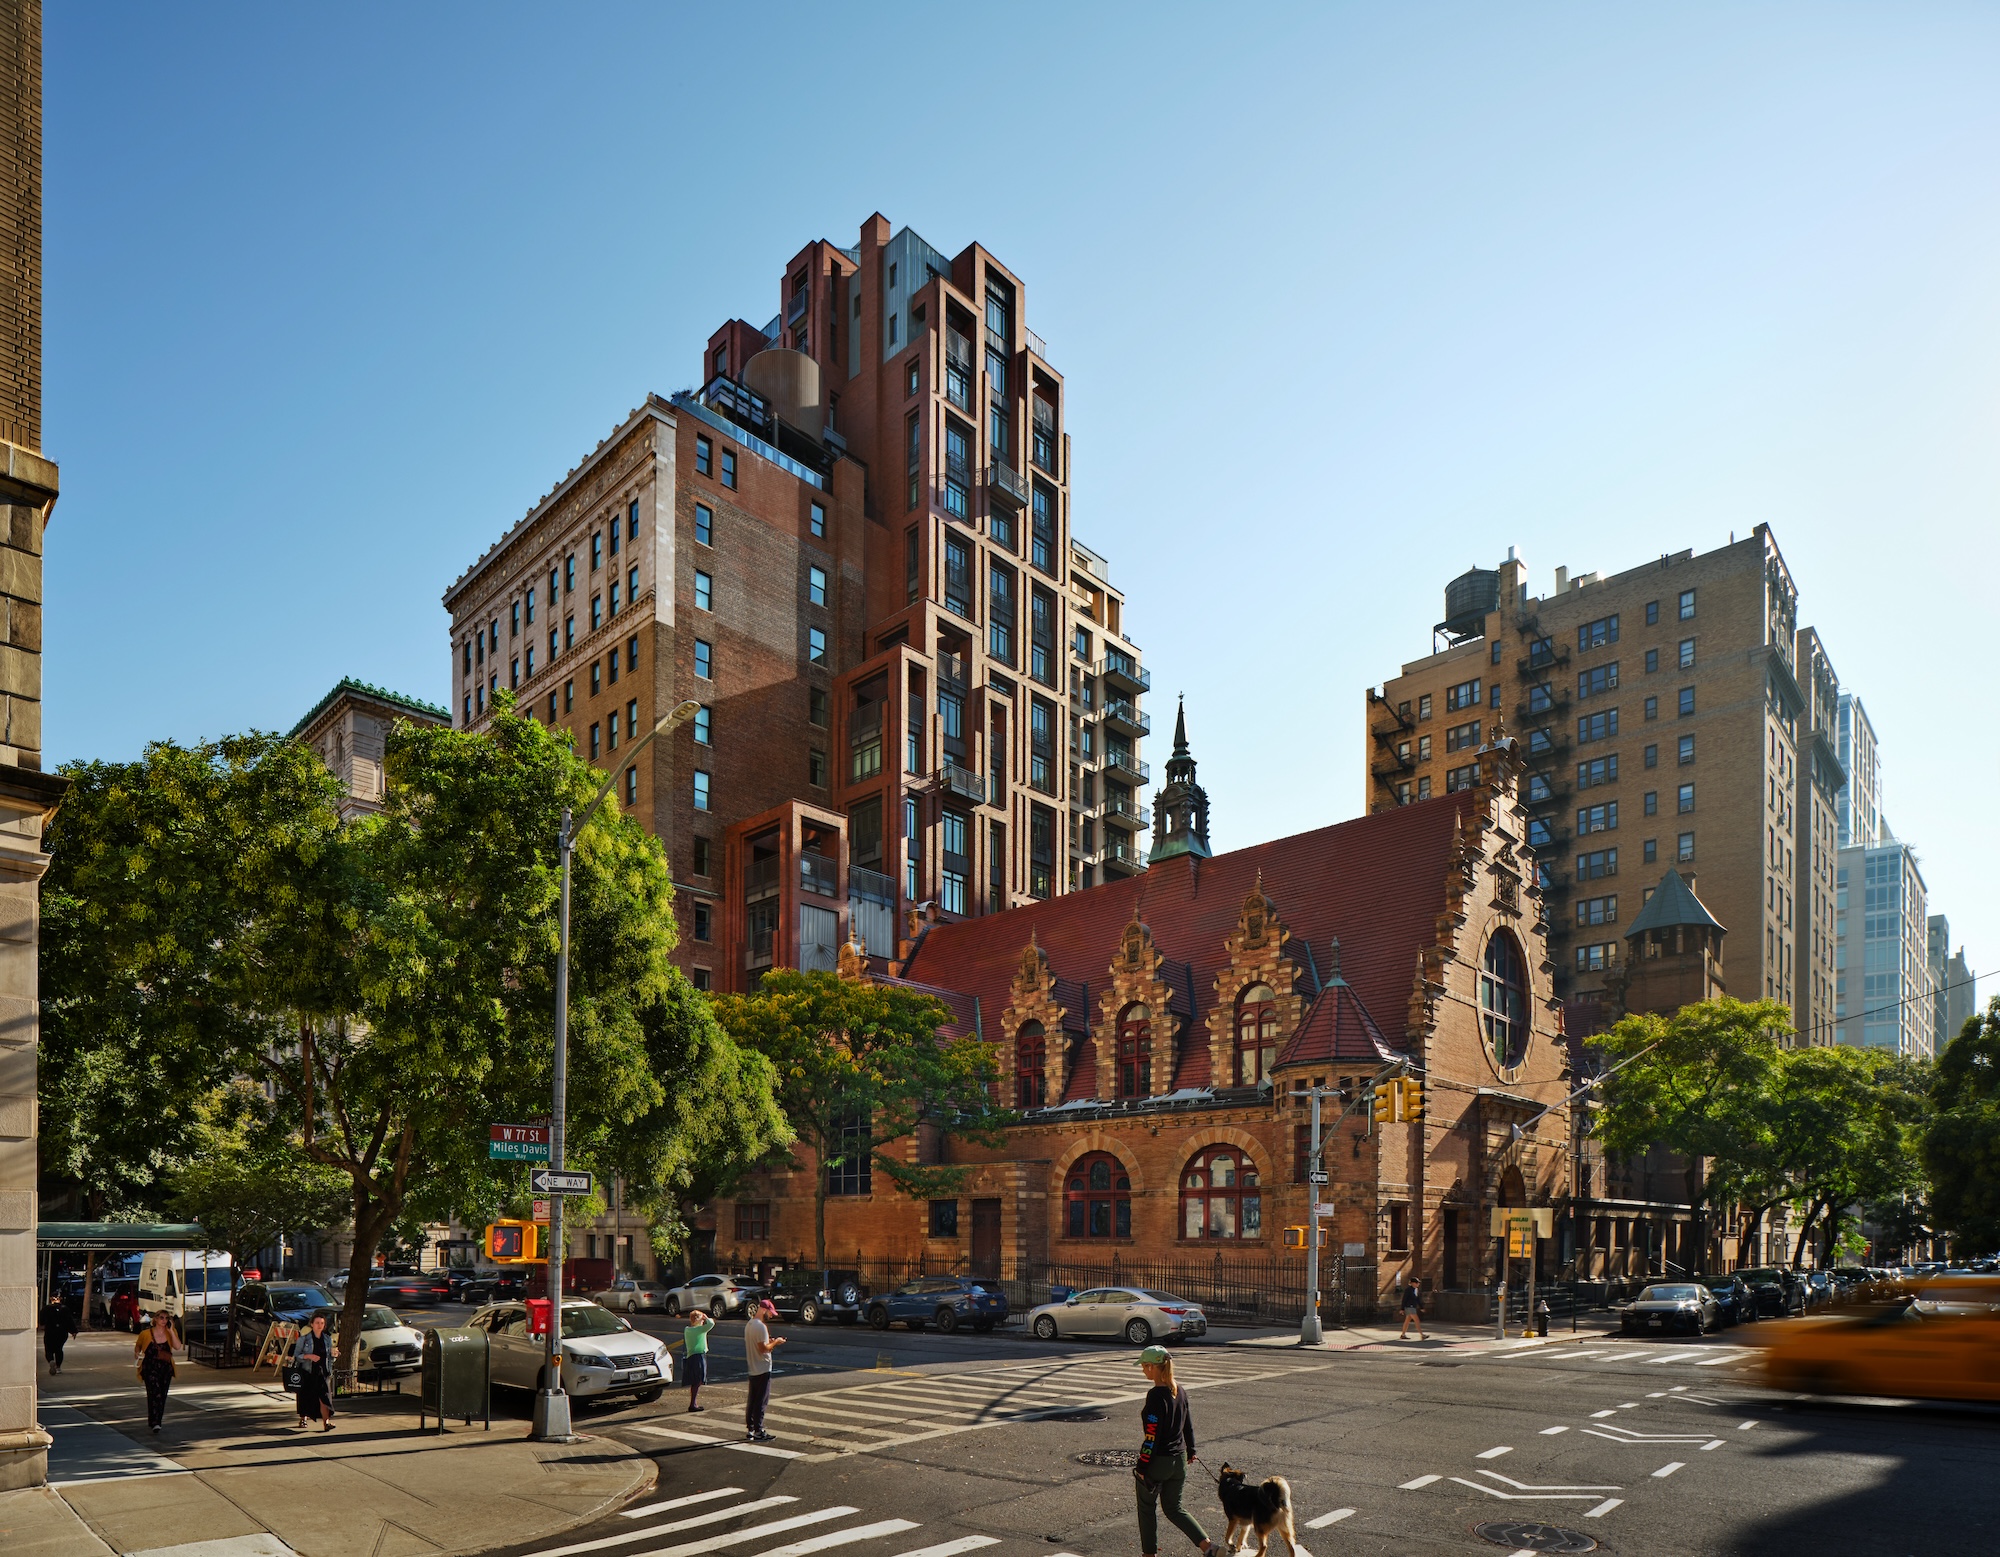 Luxury apartments in New York restore and renovate a century-old residential building